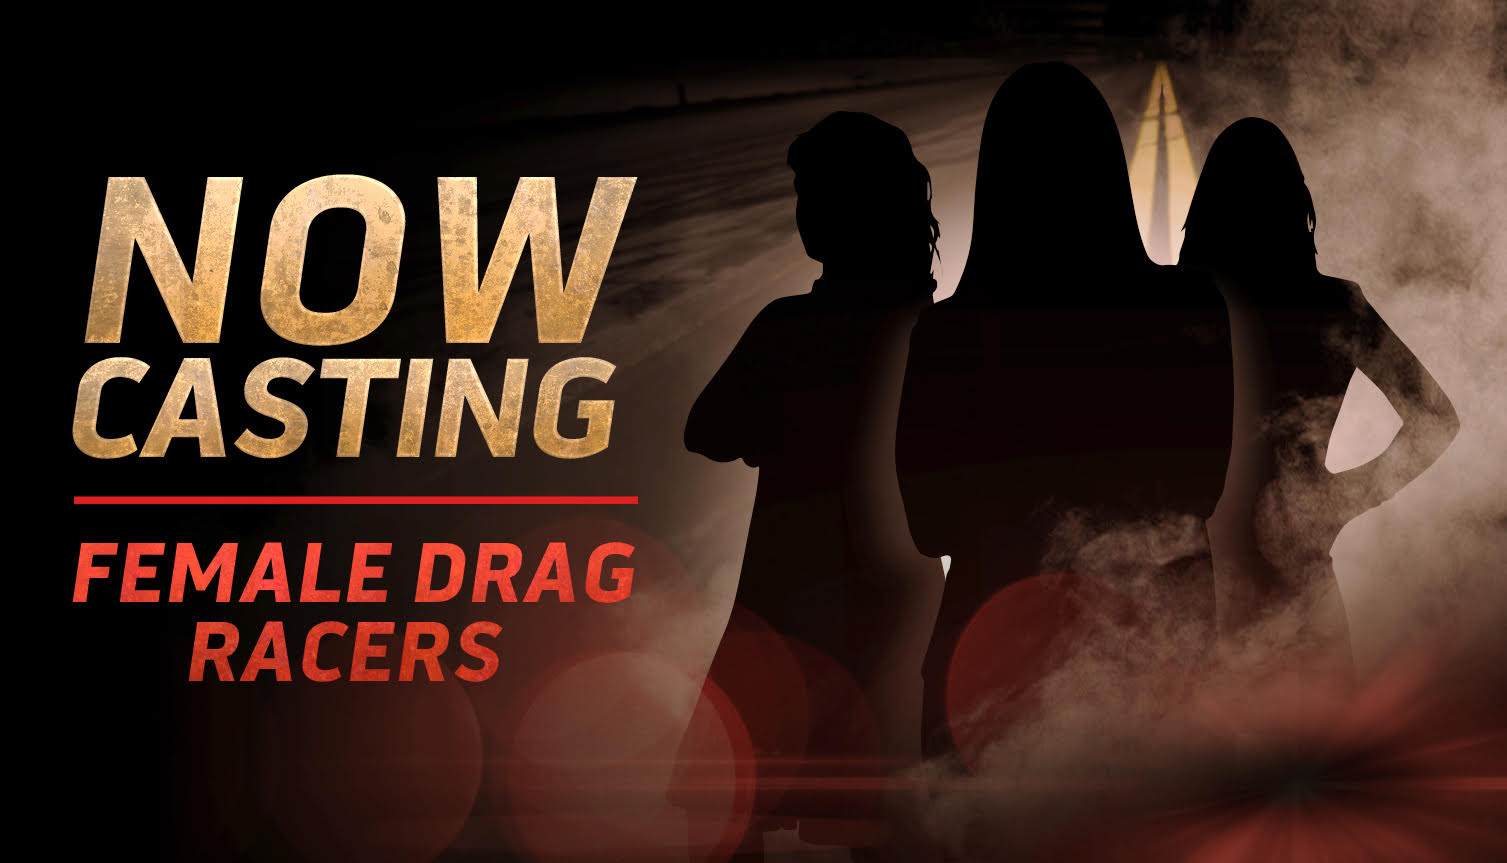 Now Casting Female Drag Racers to Compete on a Hit Reality TV Show!